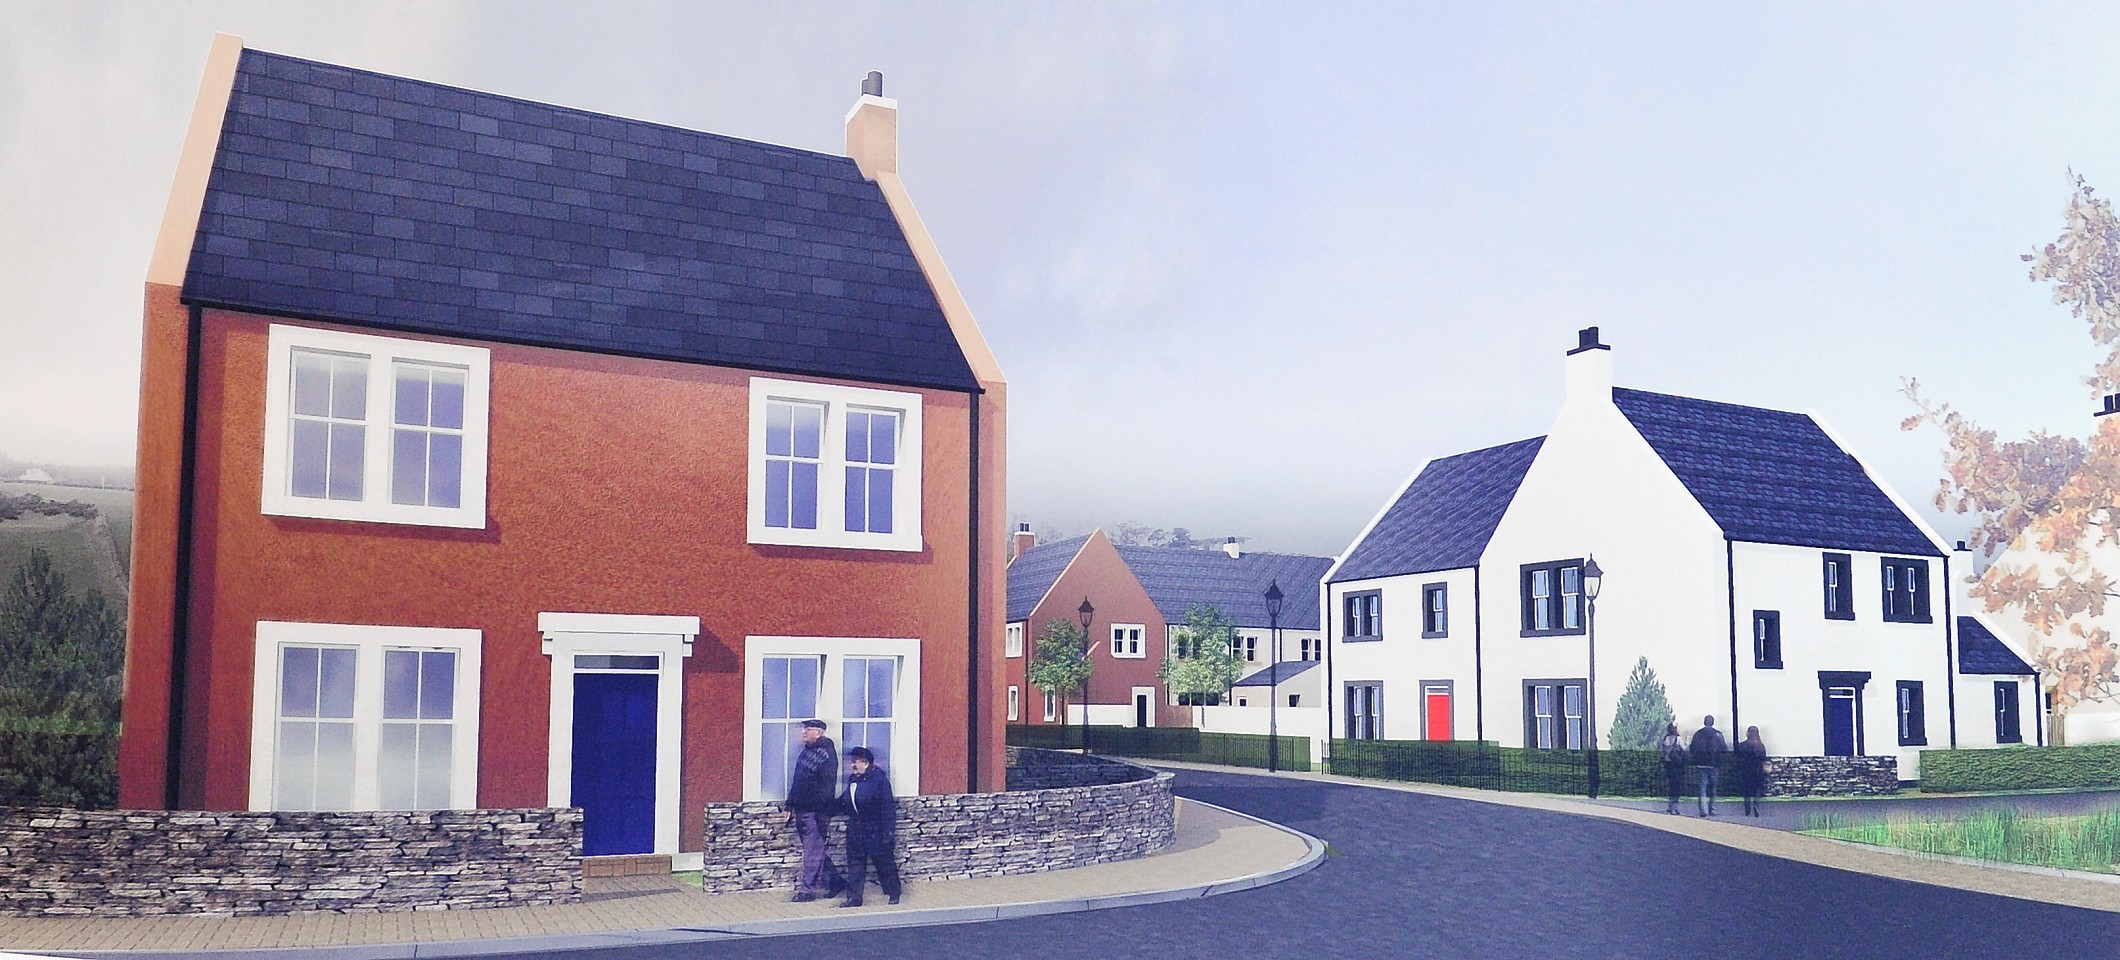 Artists impressions of the houses planned for Rosemarkie